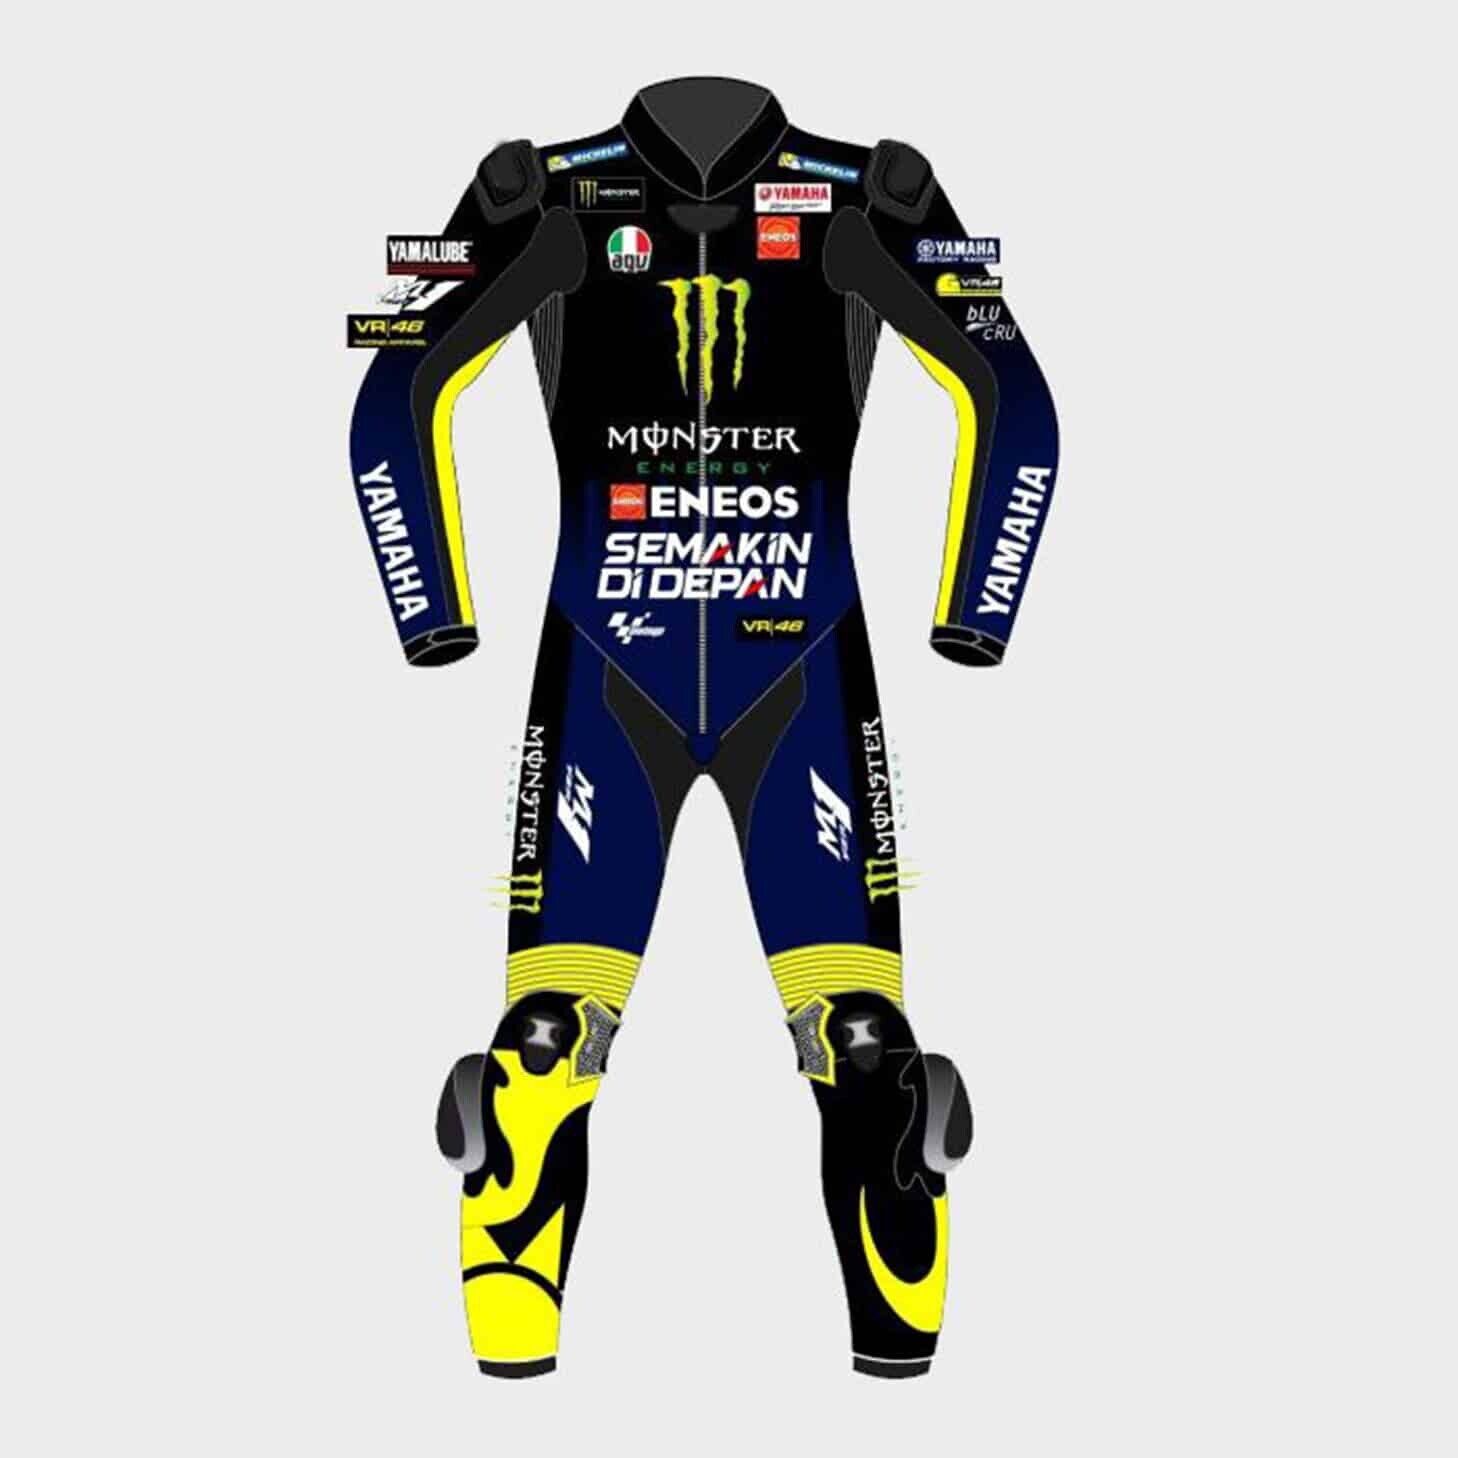 Yamaha Valentino Rossi Monster Energy 2019 Motorcycle Leather Race Suit